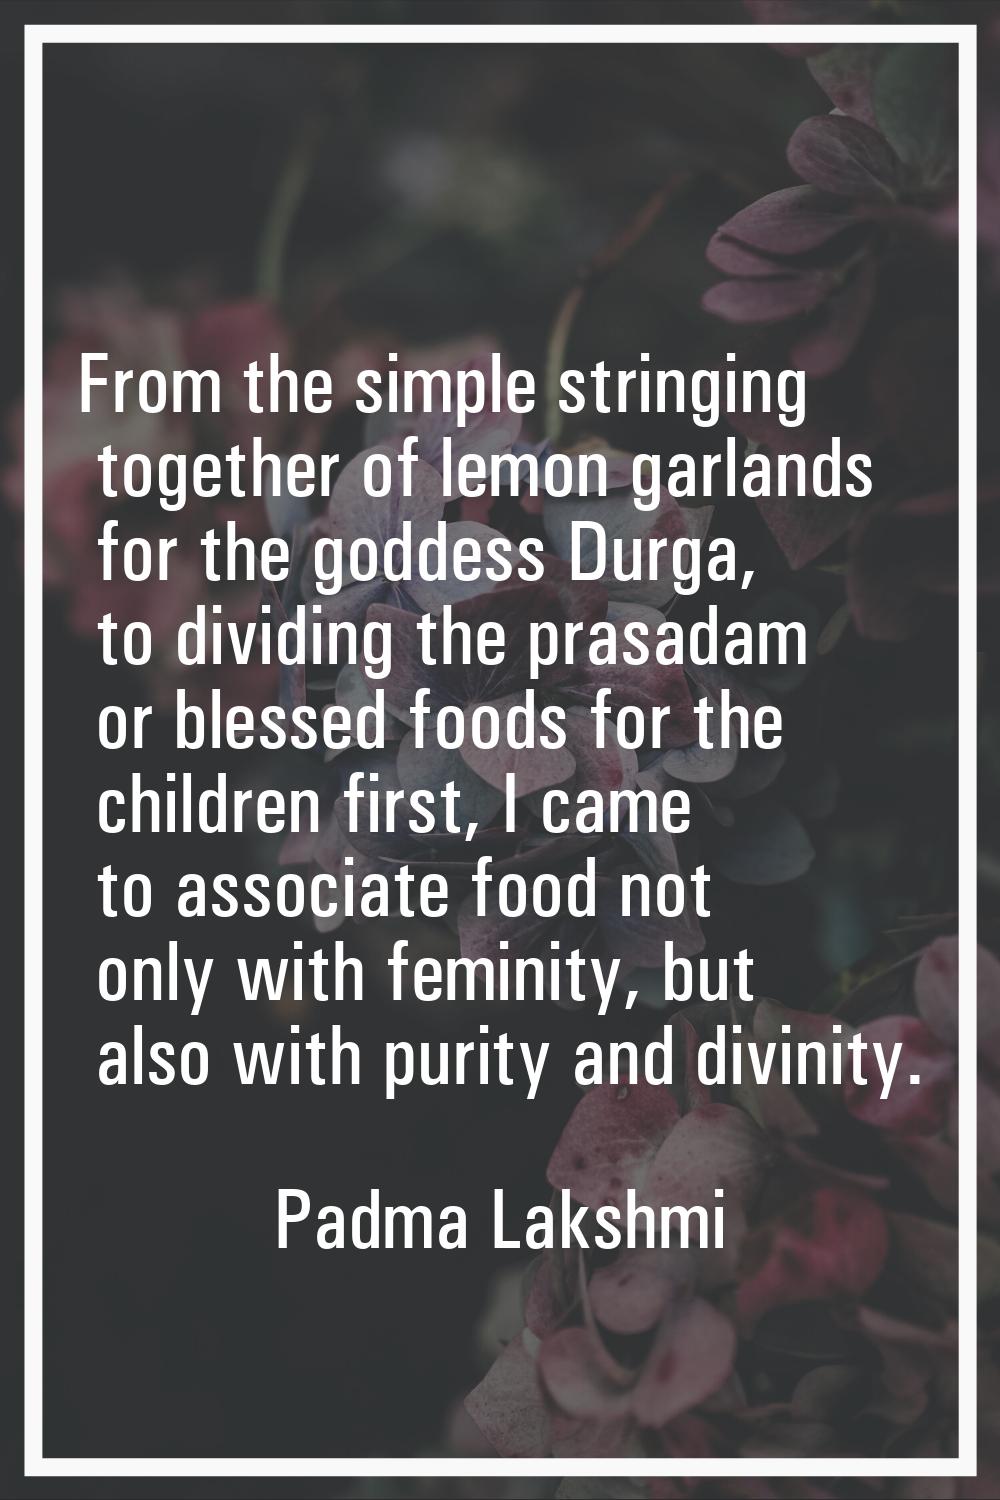 From the simple stringing together of lemon garlands for the goddess Durga, to dividing the prasada